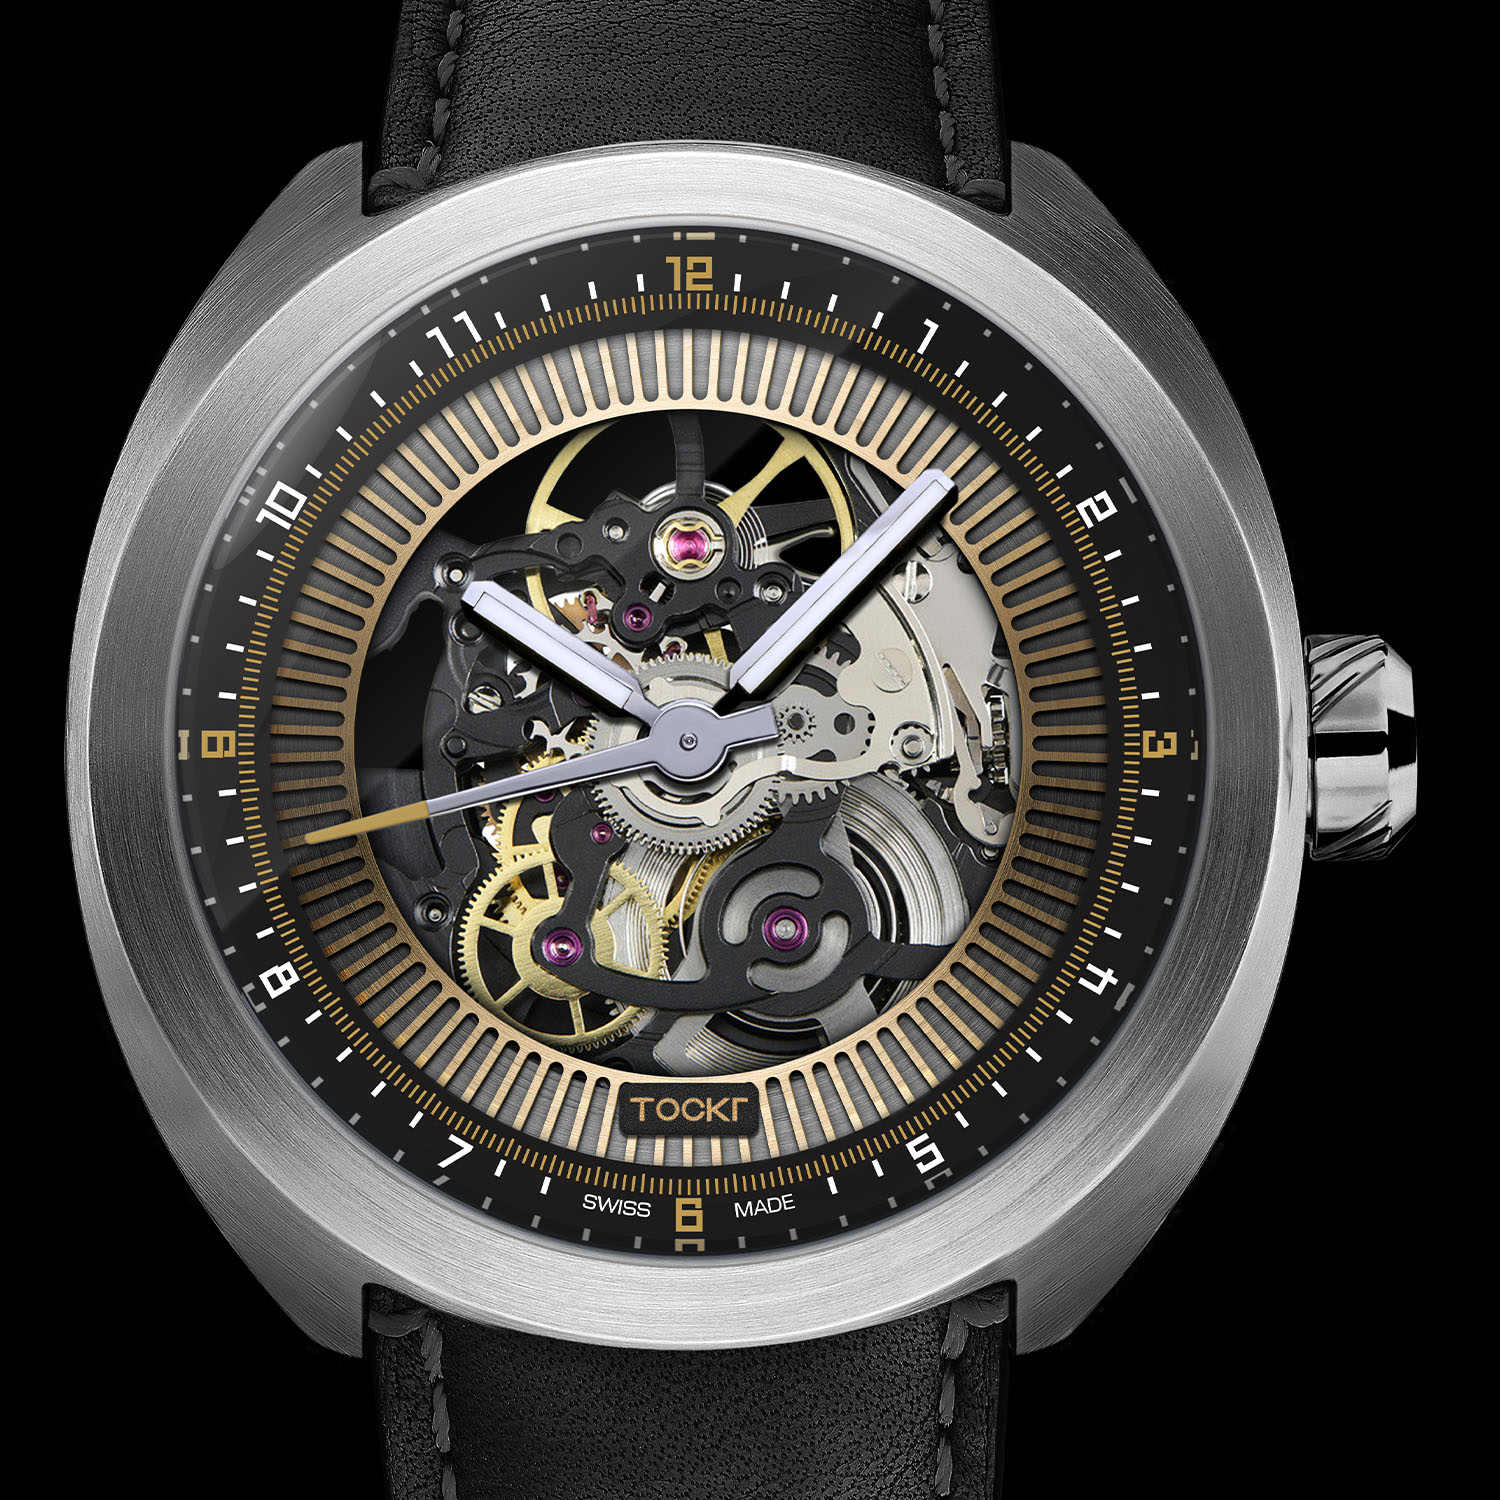 Tockr Limited C-47 Skeleton Watches